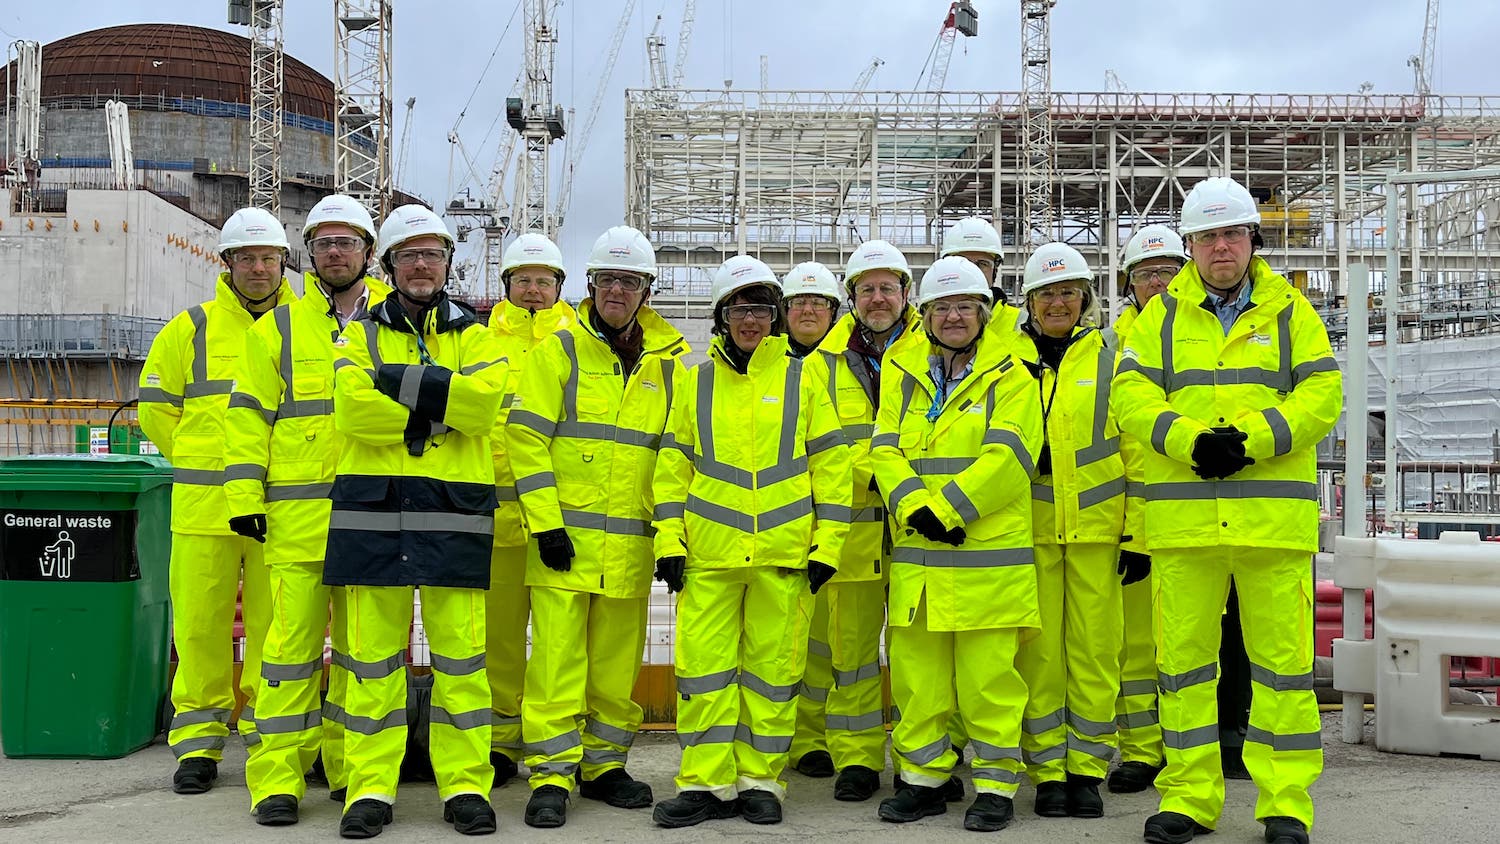 The ECITB delegation on a tour of the Hinkley Point C site